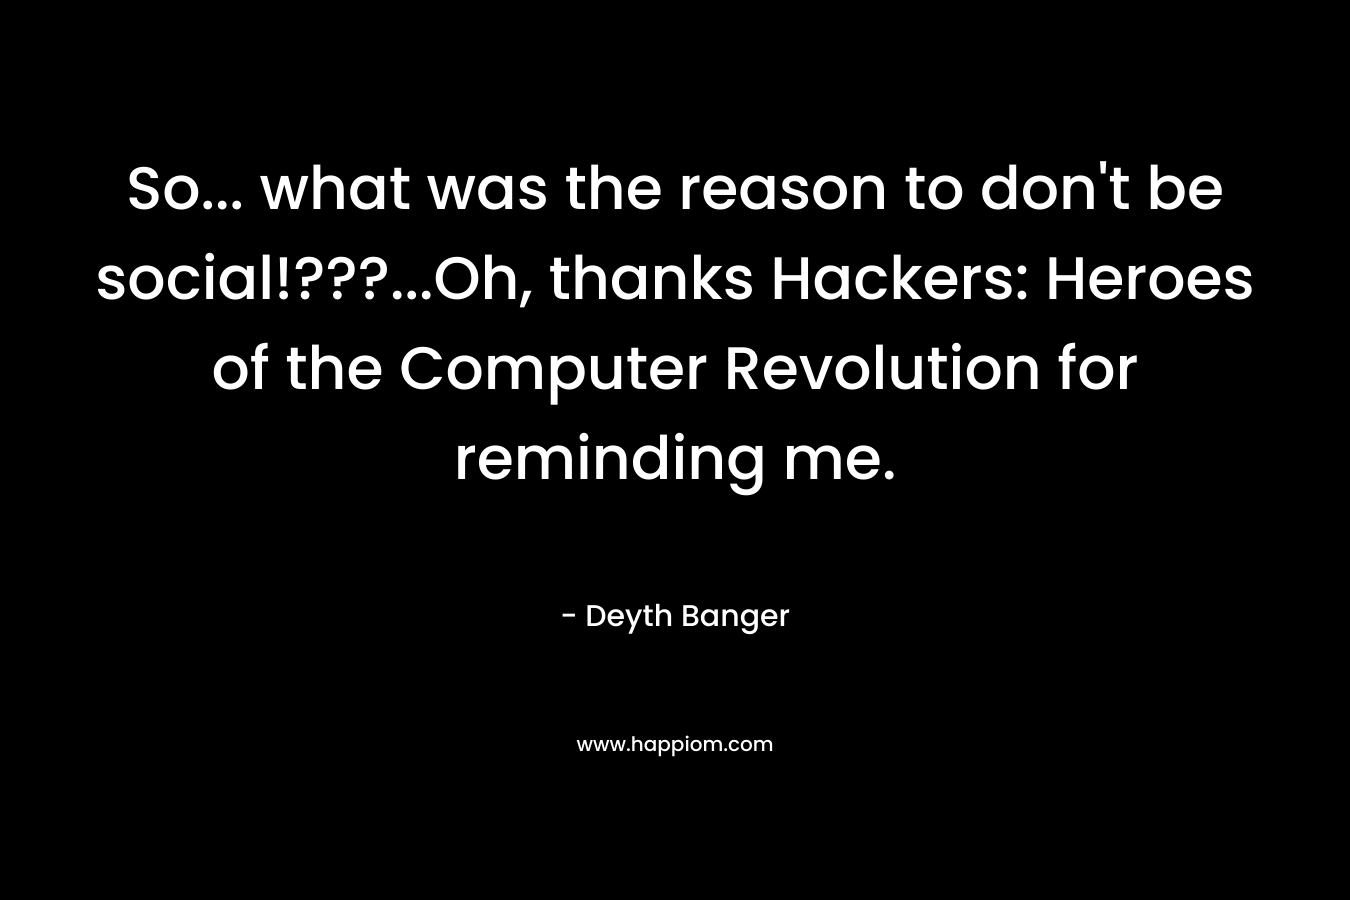 So... what was the reason to don't be social!???...Oh, thanks Hackers: Heroes of the Computer Revolution for reminding me.